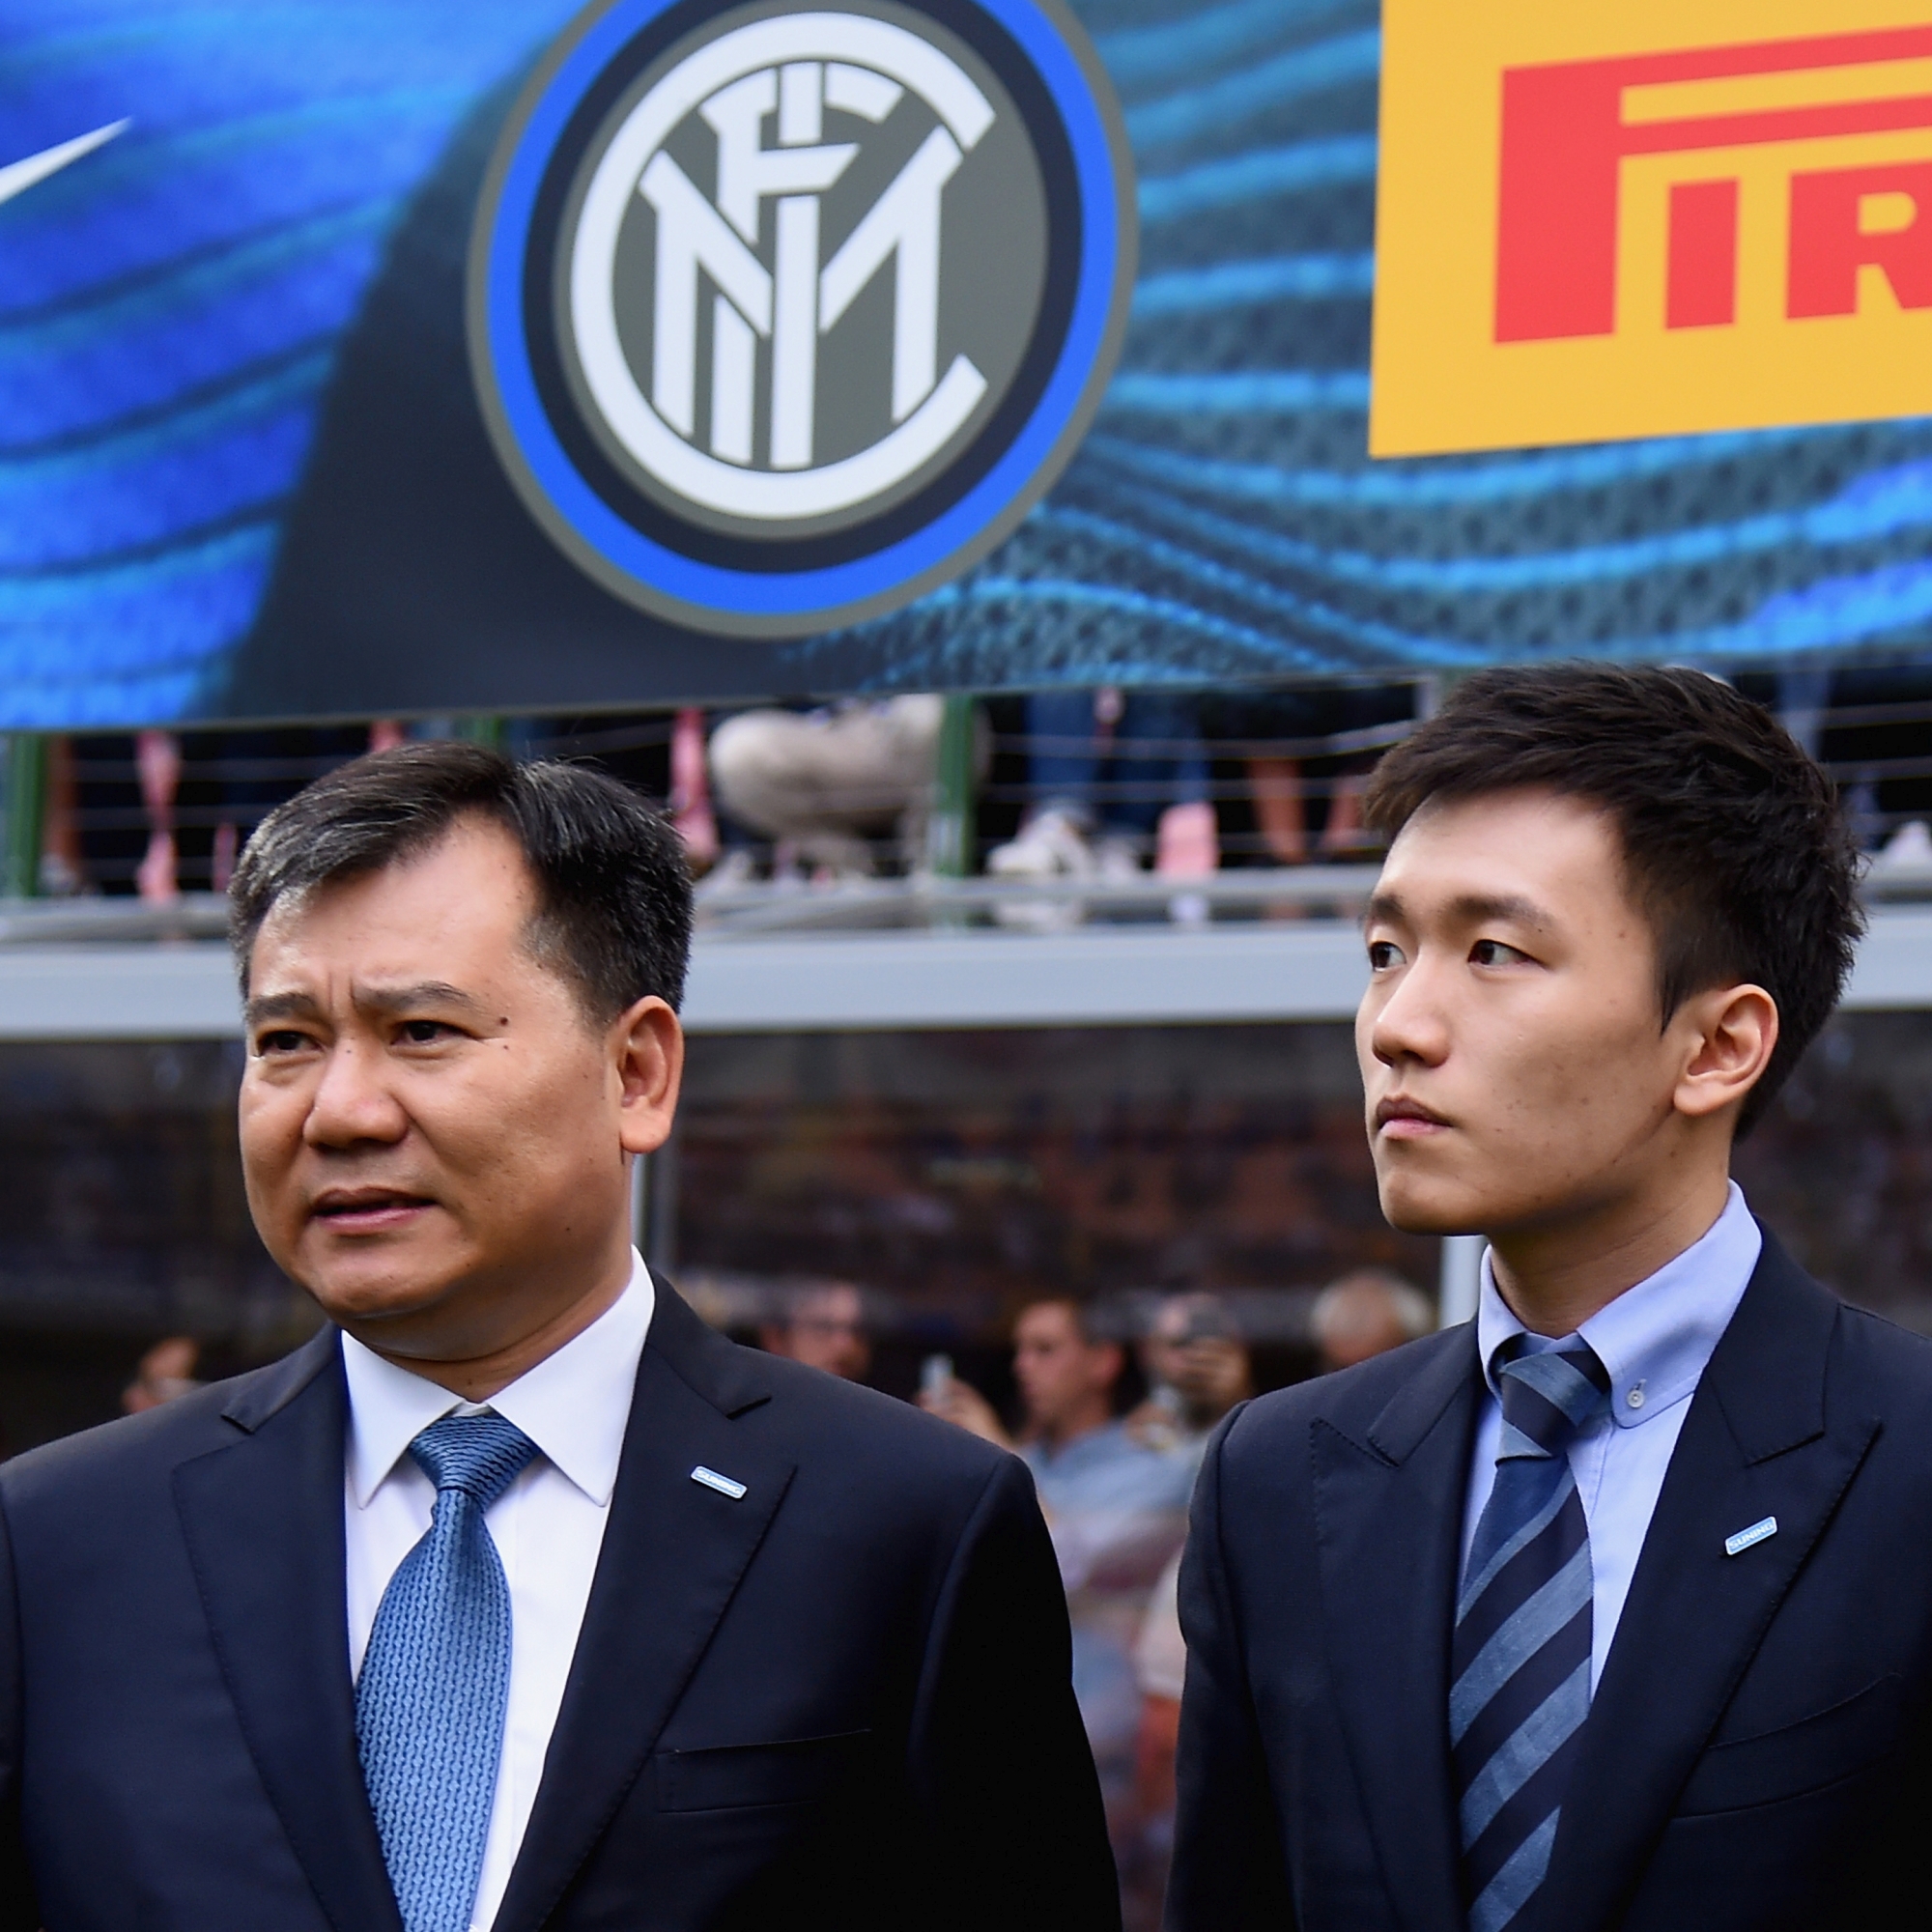 MILAN, ITALY - SEPTEMBER 18:  FC Internazionale board member Steven Zhang (R) and chairman of Suning holdings group Zhang Jindong chat prior to the Serie A match between FC Internazionale and Juventus FC at Stadio Giuseppe Meazza on September 18, 2016 in Milan, Italy.  (Photo by Claudio Villa - Inter/FC Internazionale via Getty Images)